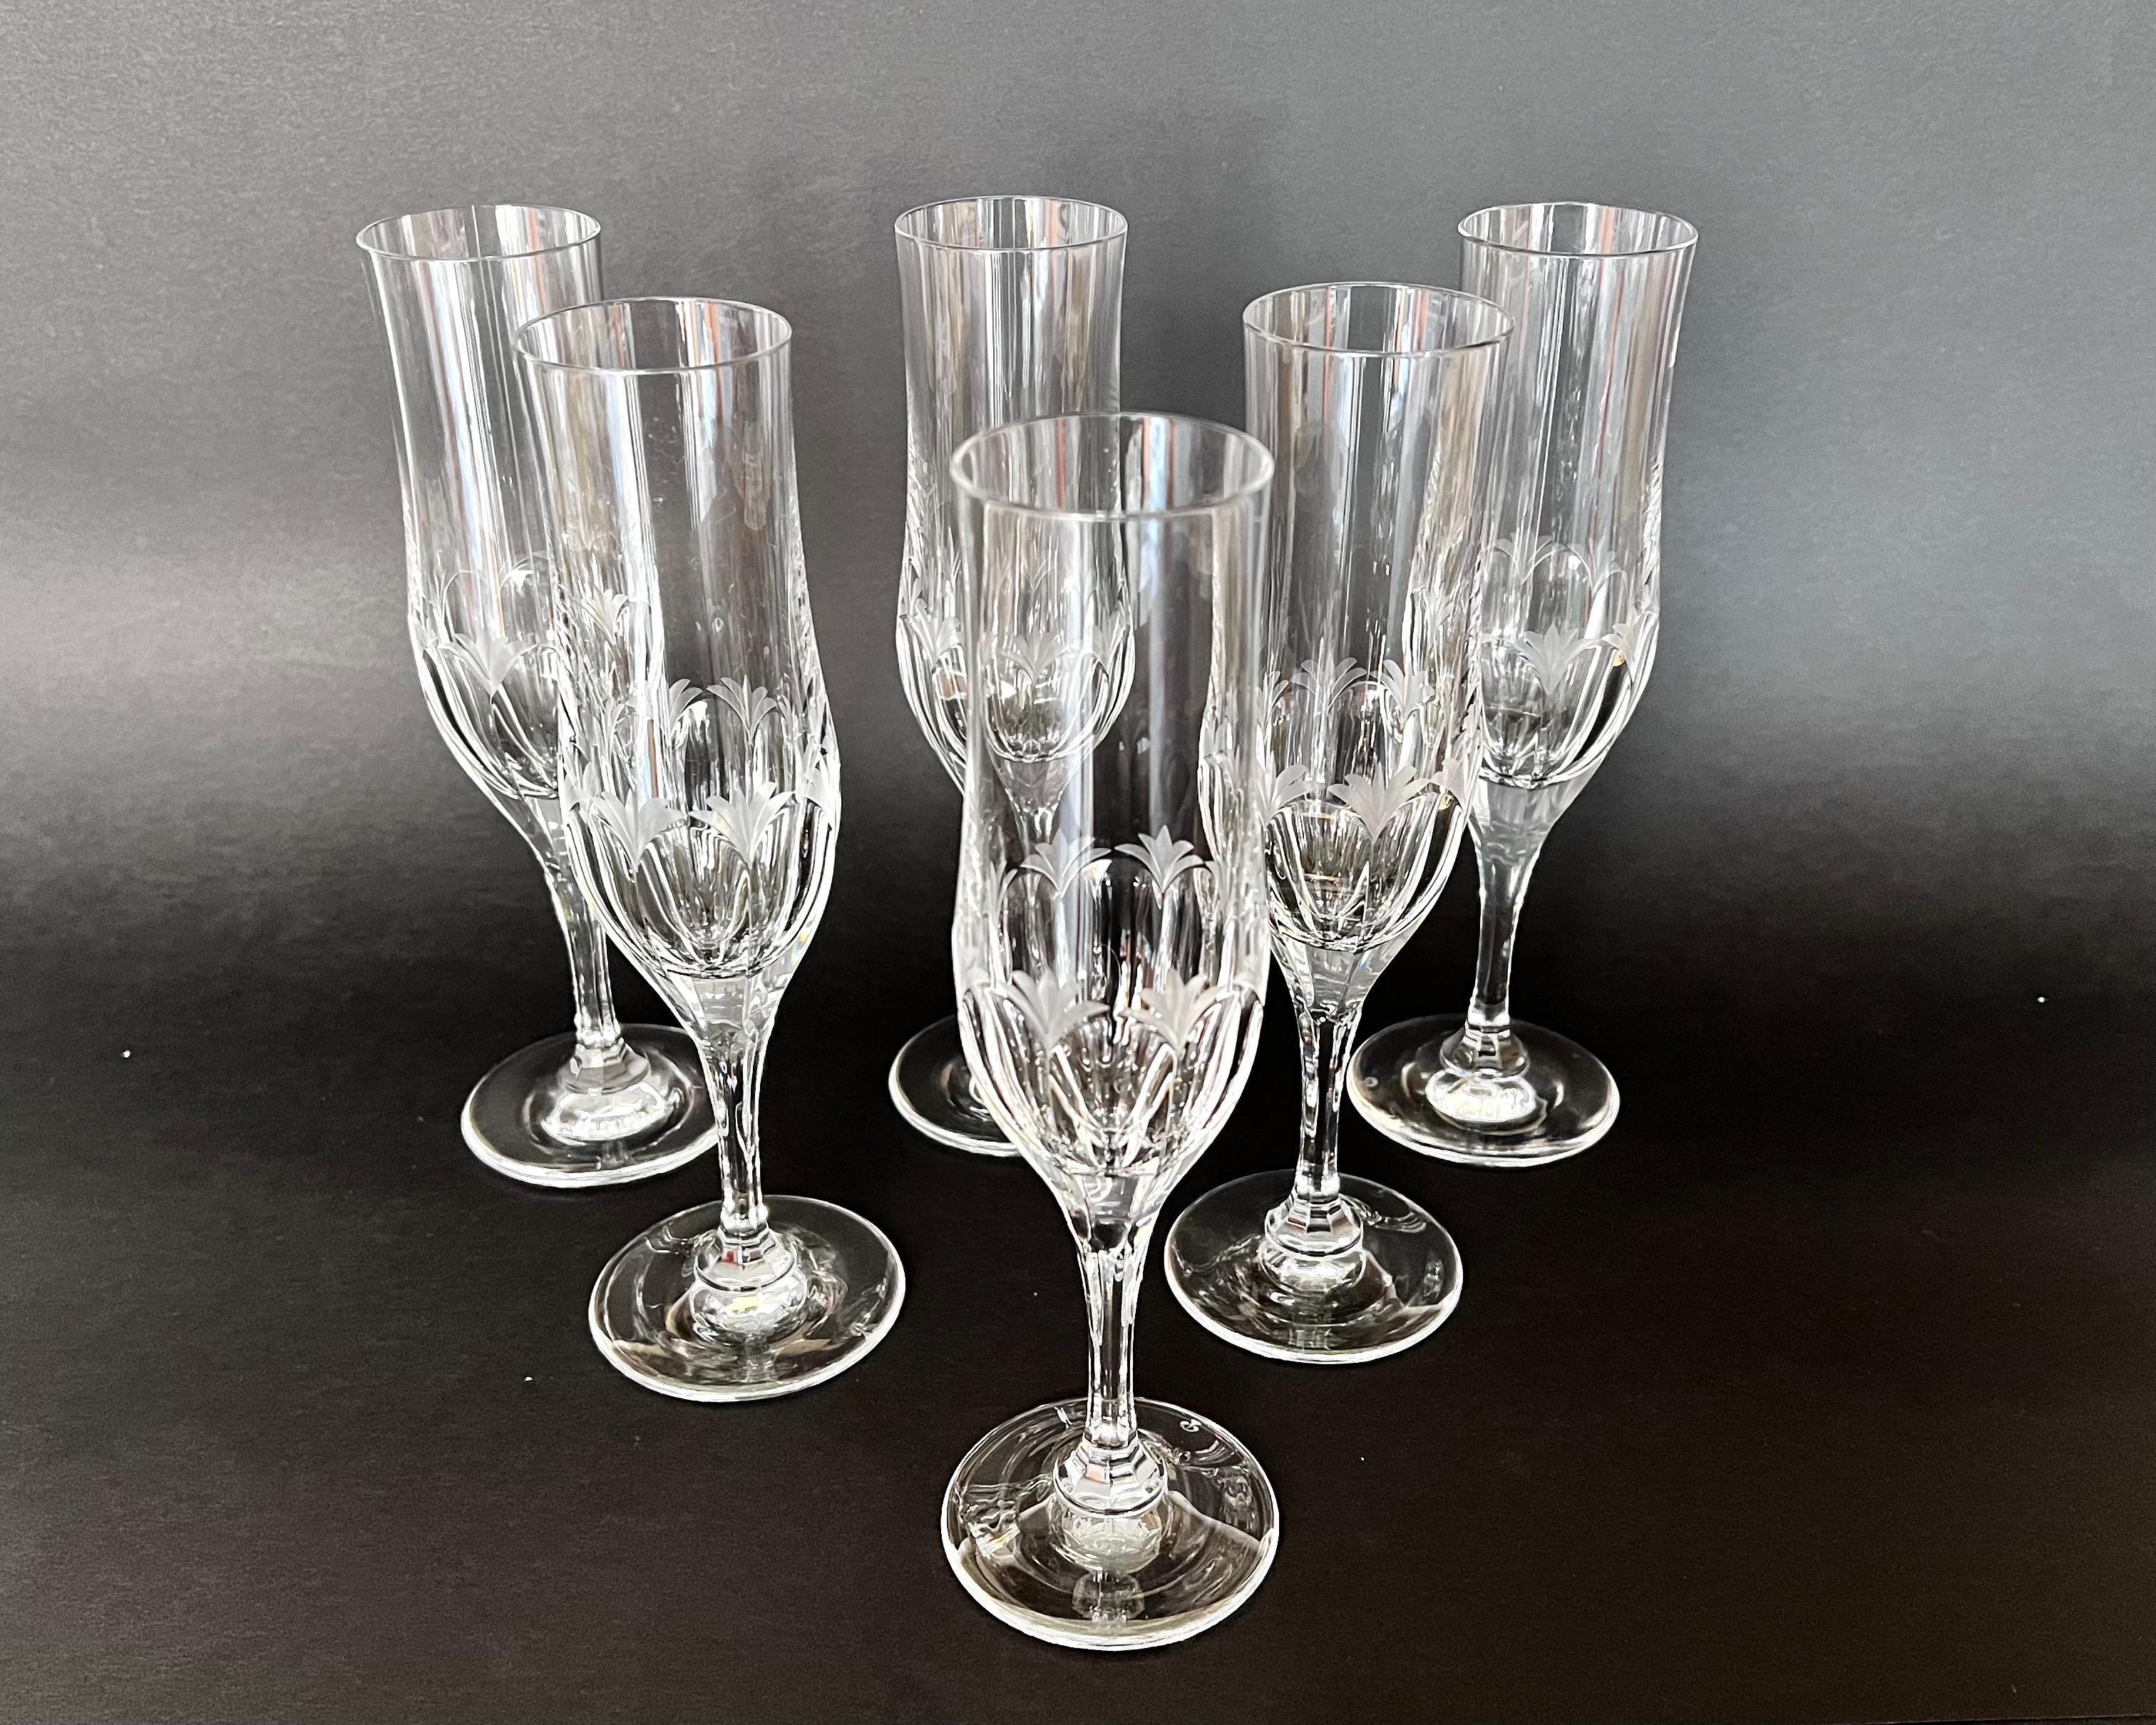 Crystal champagne flute glasses, Germany, 1980s. Stamped.

The vintage set consists of six classic champagne glasses made of durable etching crystal with diamond cutting.

Products are equipped with high legs and are designed for serving